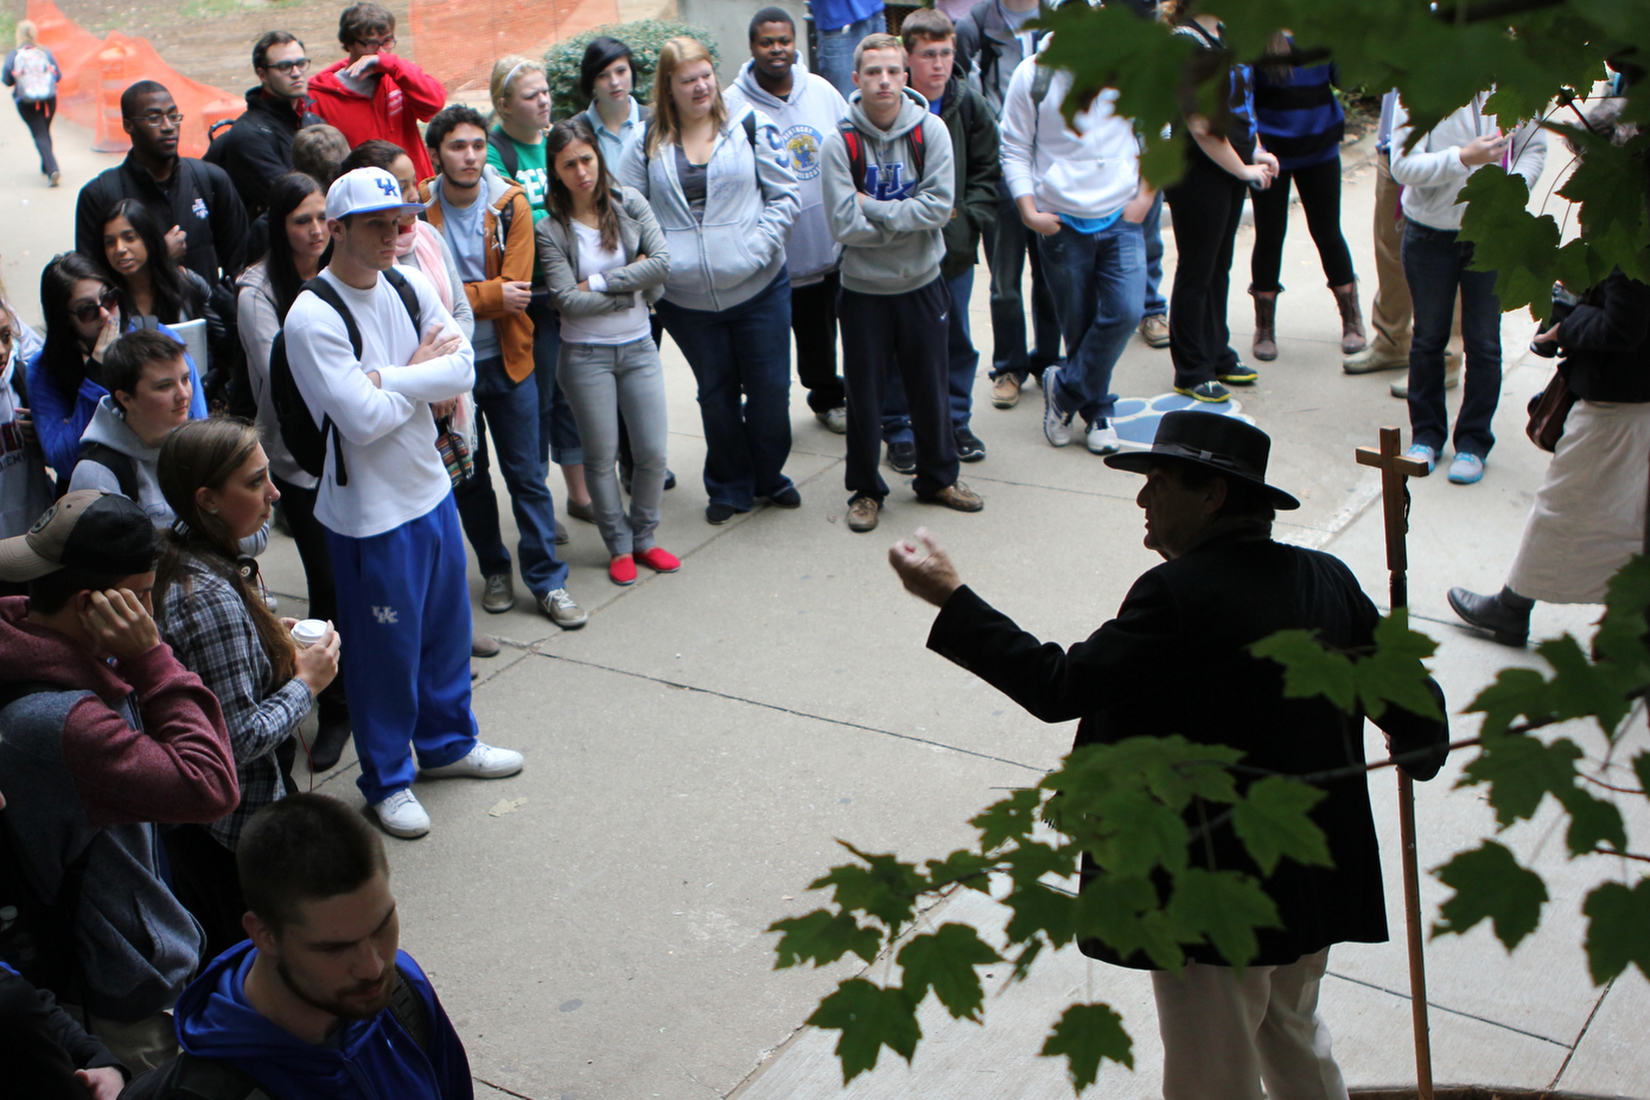  Dozens of students watch on as Brother Jed Smock preaches in the free speech area in front of the University of Kentucky's student center in Lexington, Ky. 